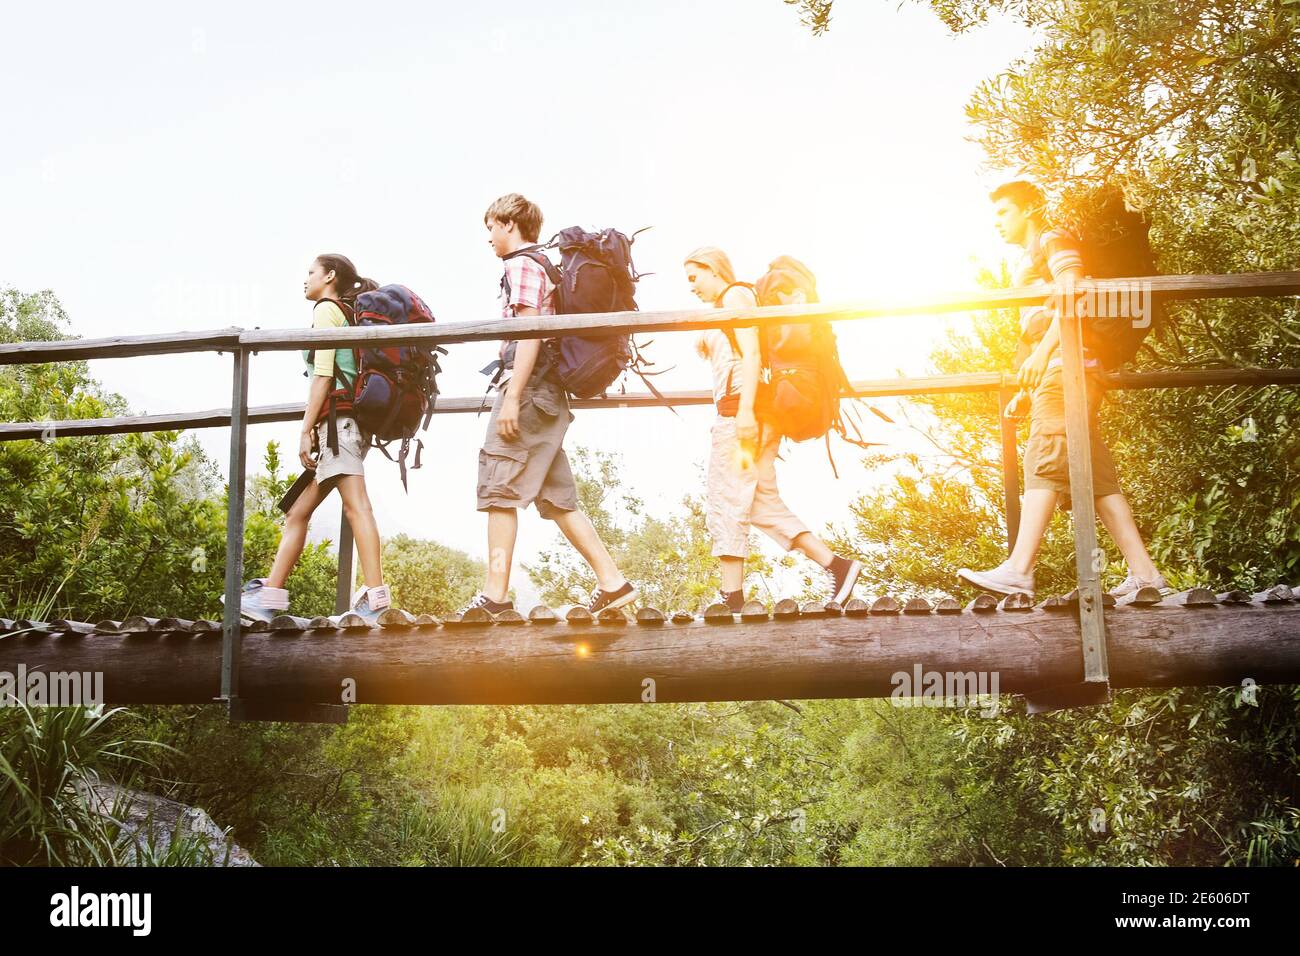 Teenage boys and girls with backpacks walking on bridge in forest Stock Photo